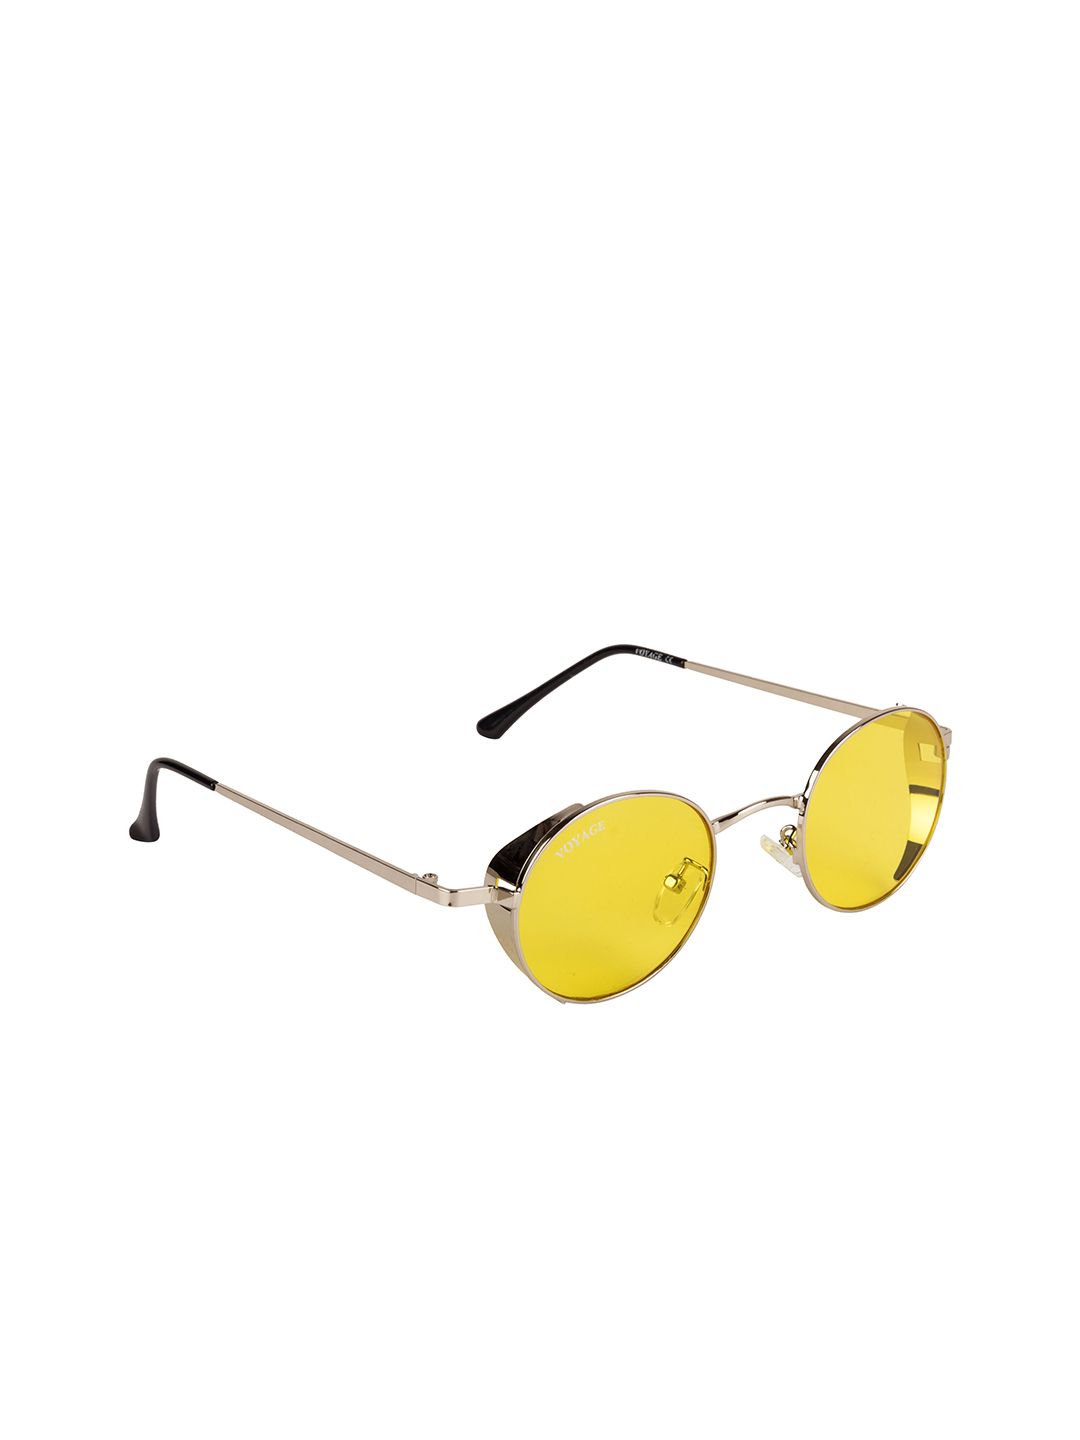 Voyage Yellow Lens & Silver-Toned Round Sunglasses & UV Protected Lens B80320MG3203Z Price in India